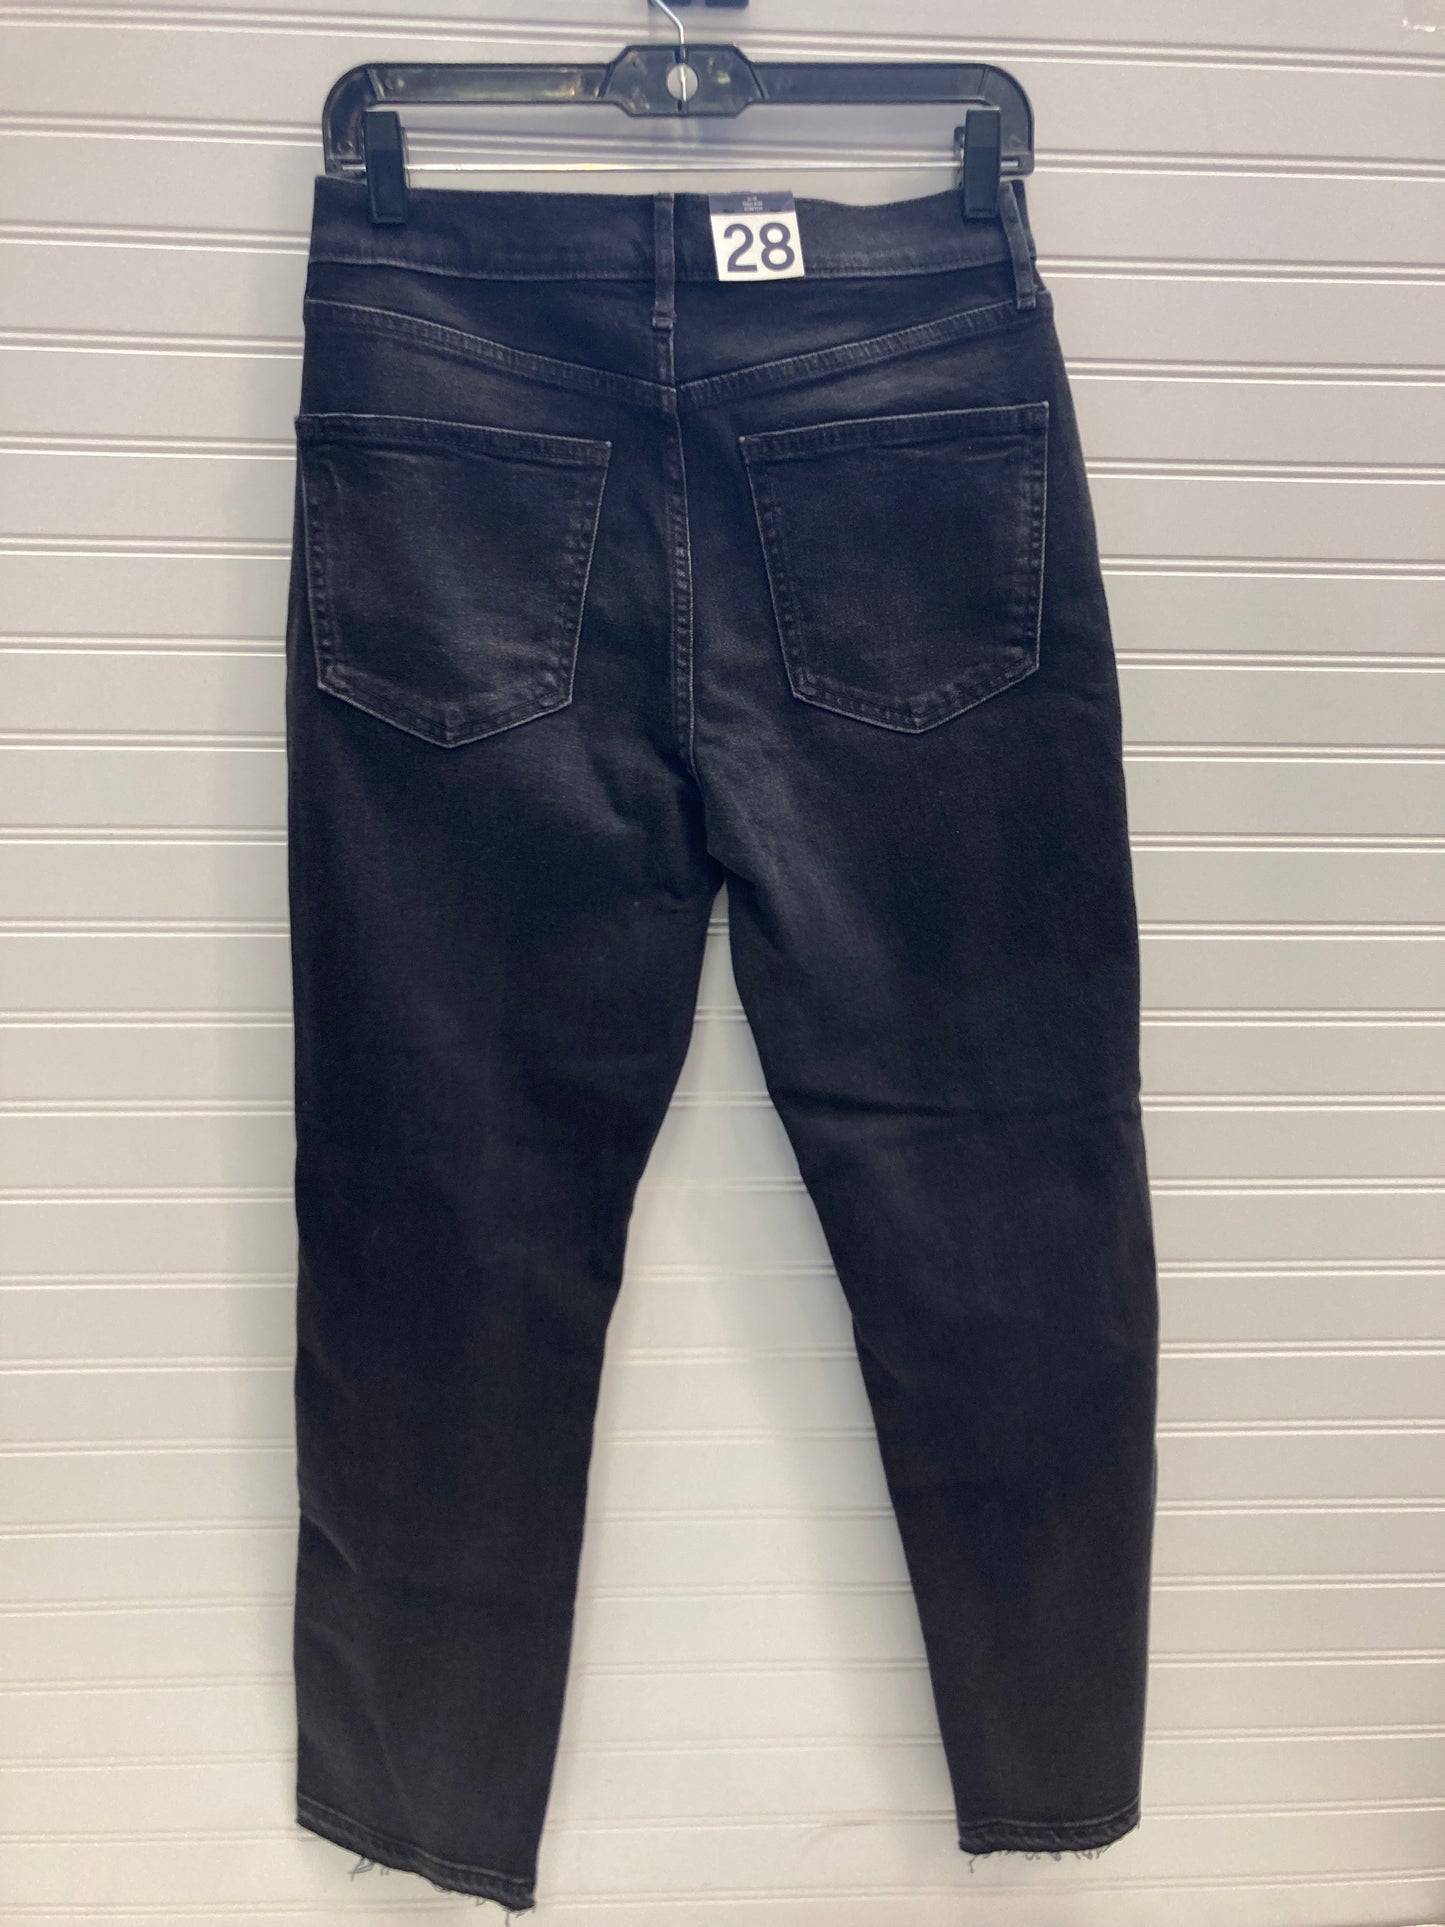 Jeans Cropped By Gap  Size: 6